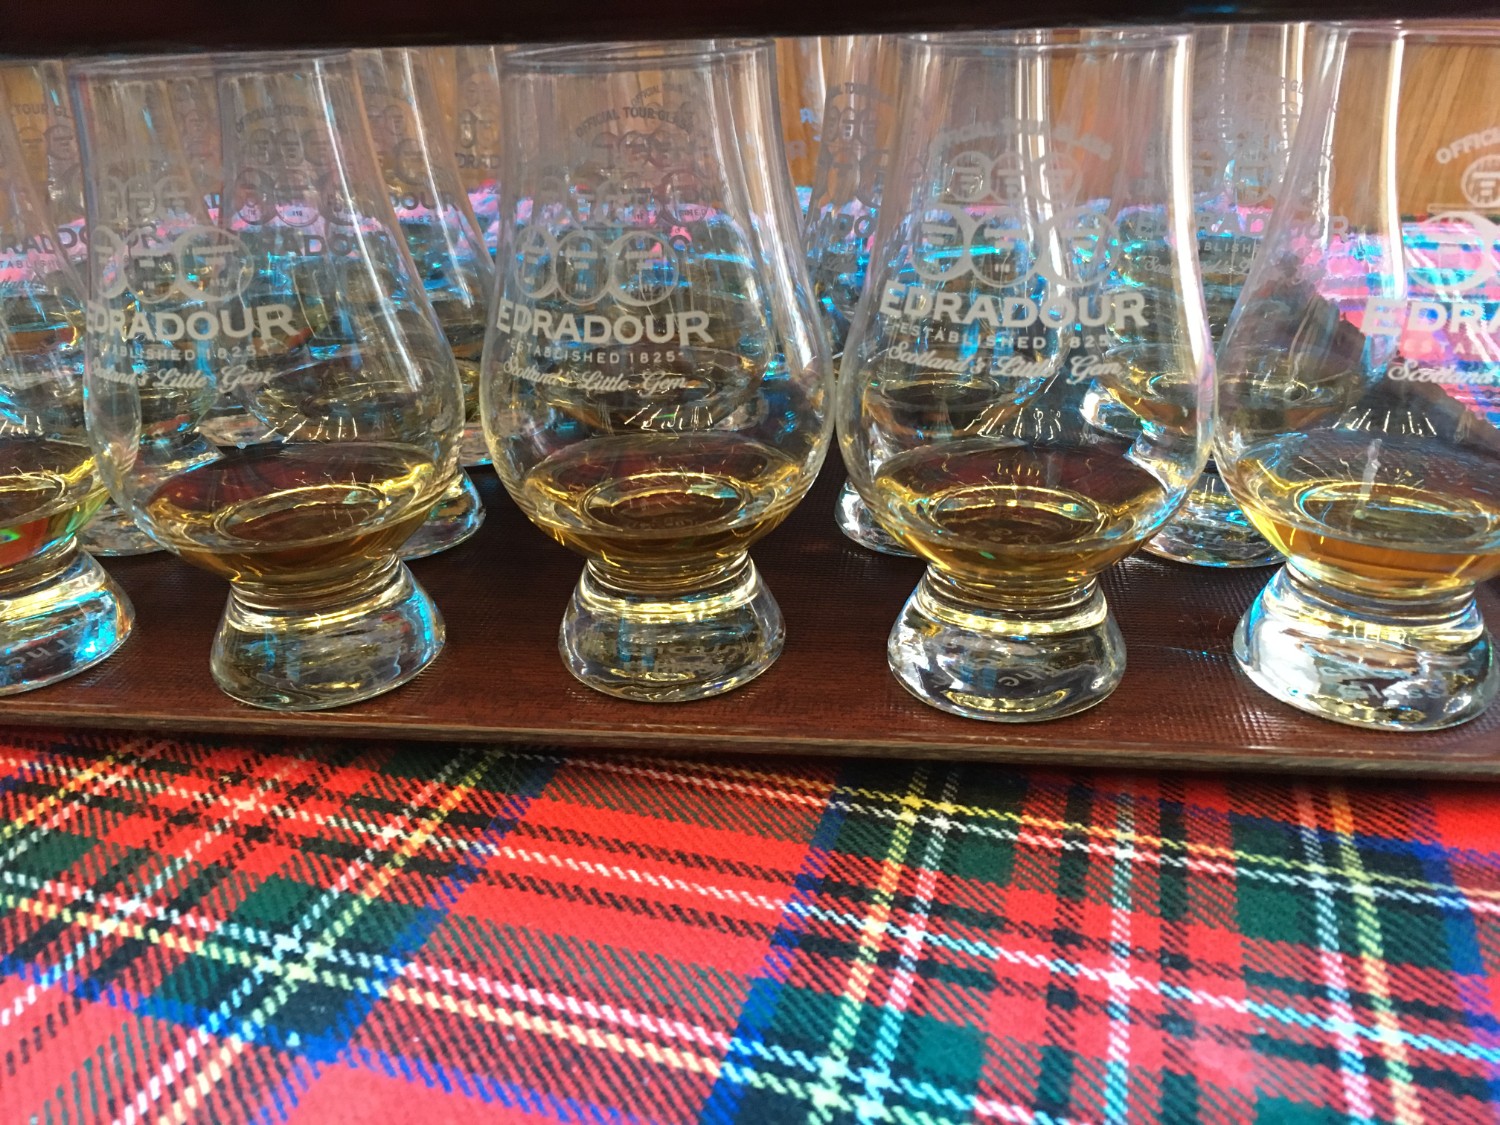 A tray full of drams of whisky resting on tartan at Edradour Distillery in Pitlochry, Scotland